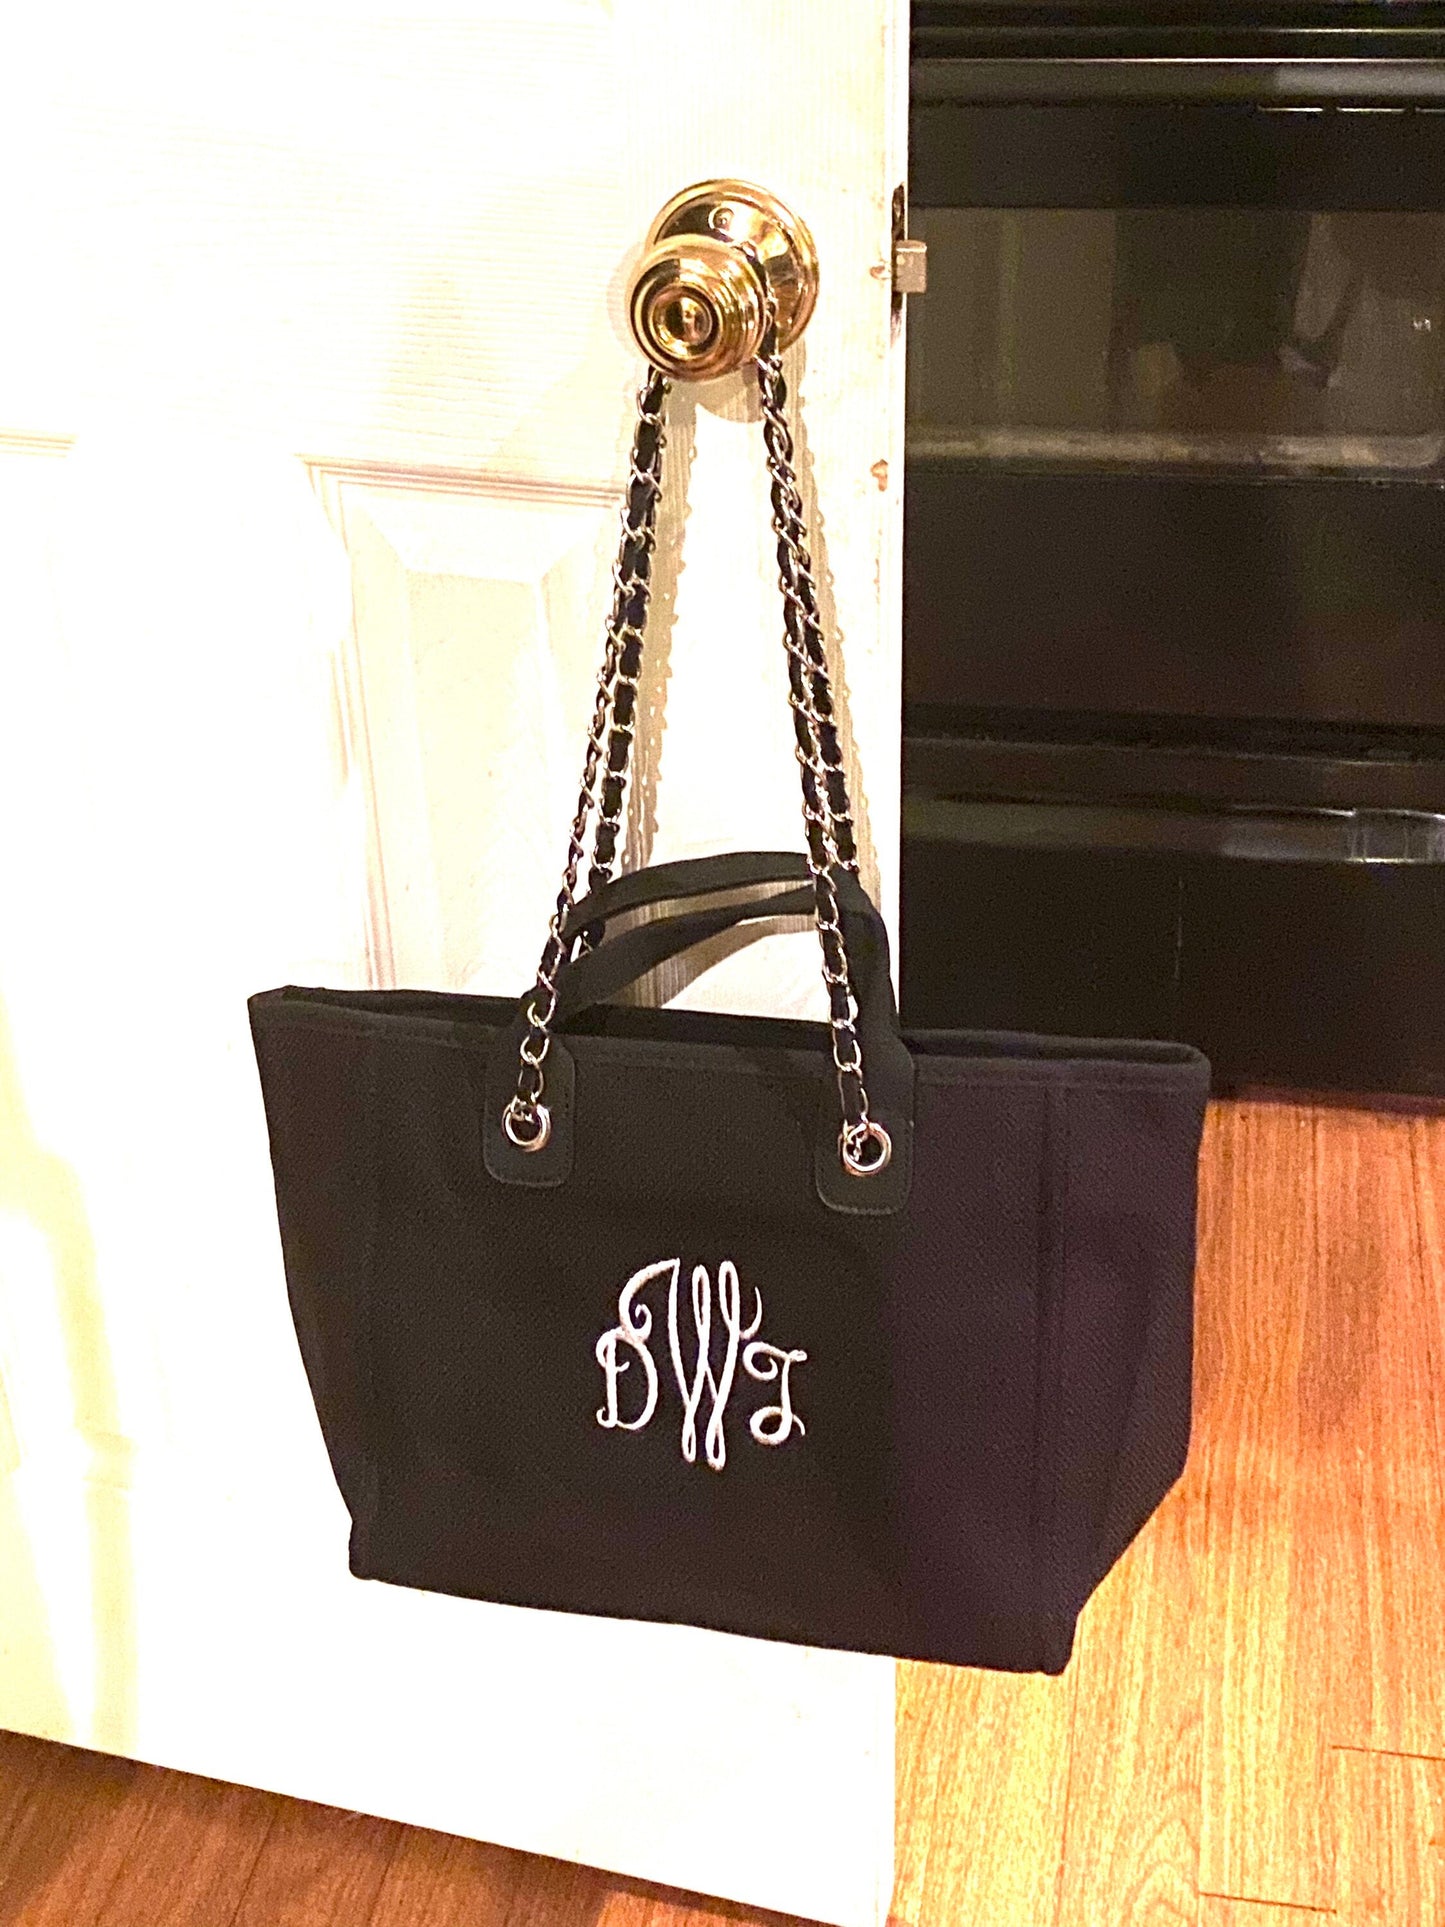 Two-Toned Monogrammed Chain Tote, Tweed Purse, Personalized, Shoulder Bag, Monogrammed, Bag